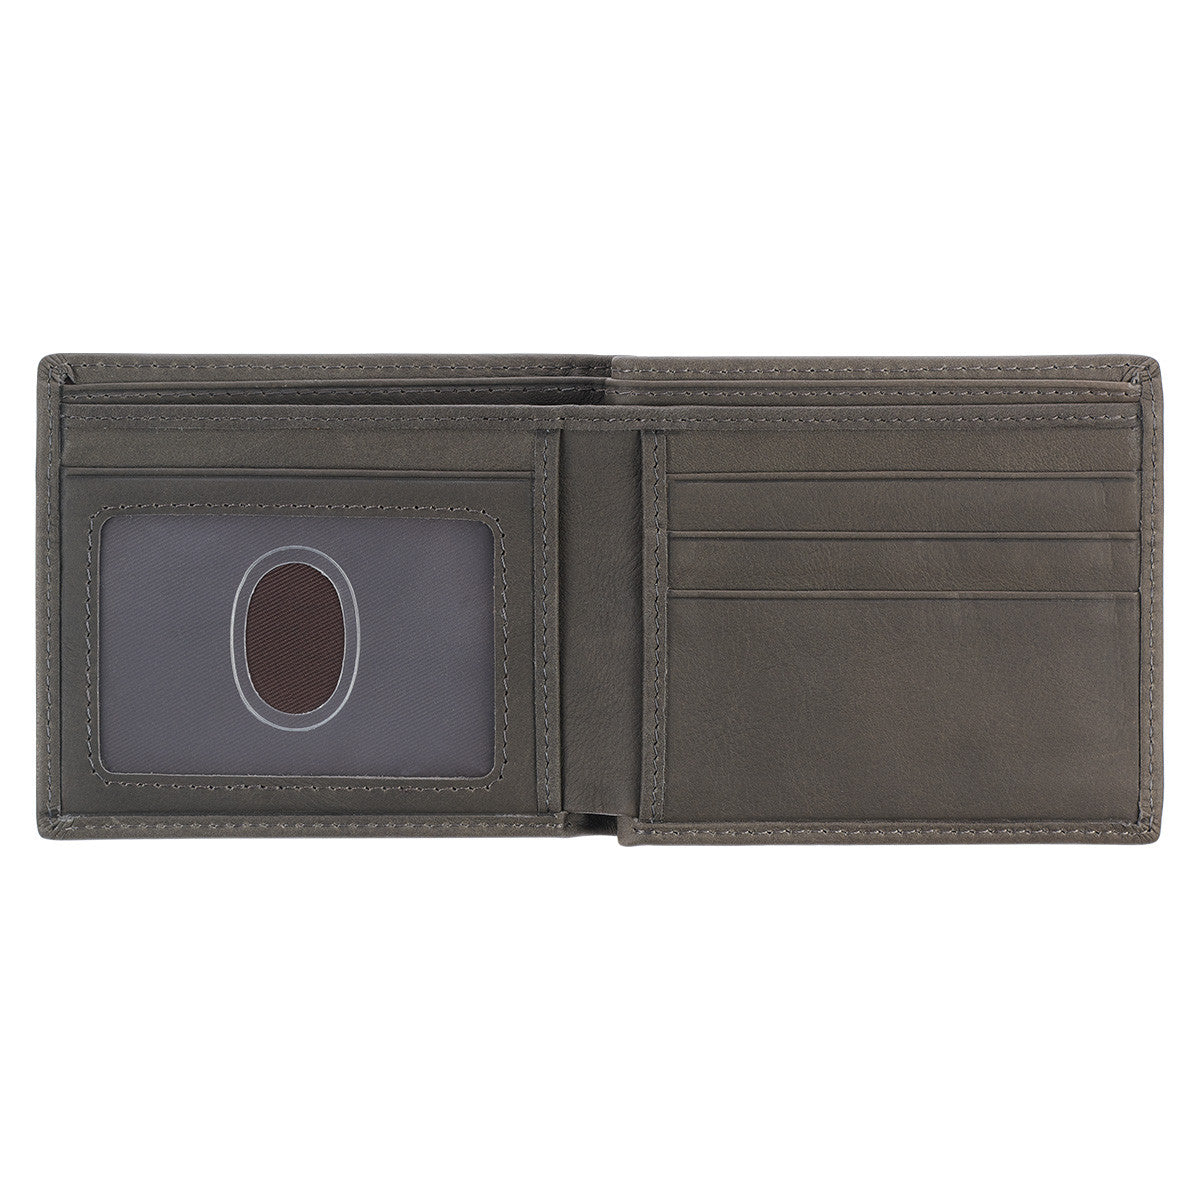 Salt Of The Earth Grey Genuine Leather Wallet - The Christian Gift Company